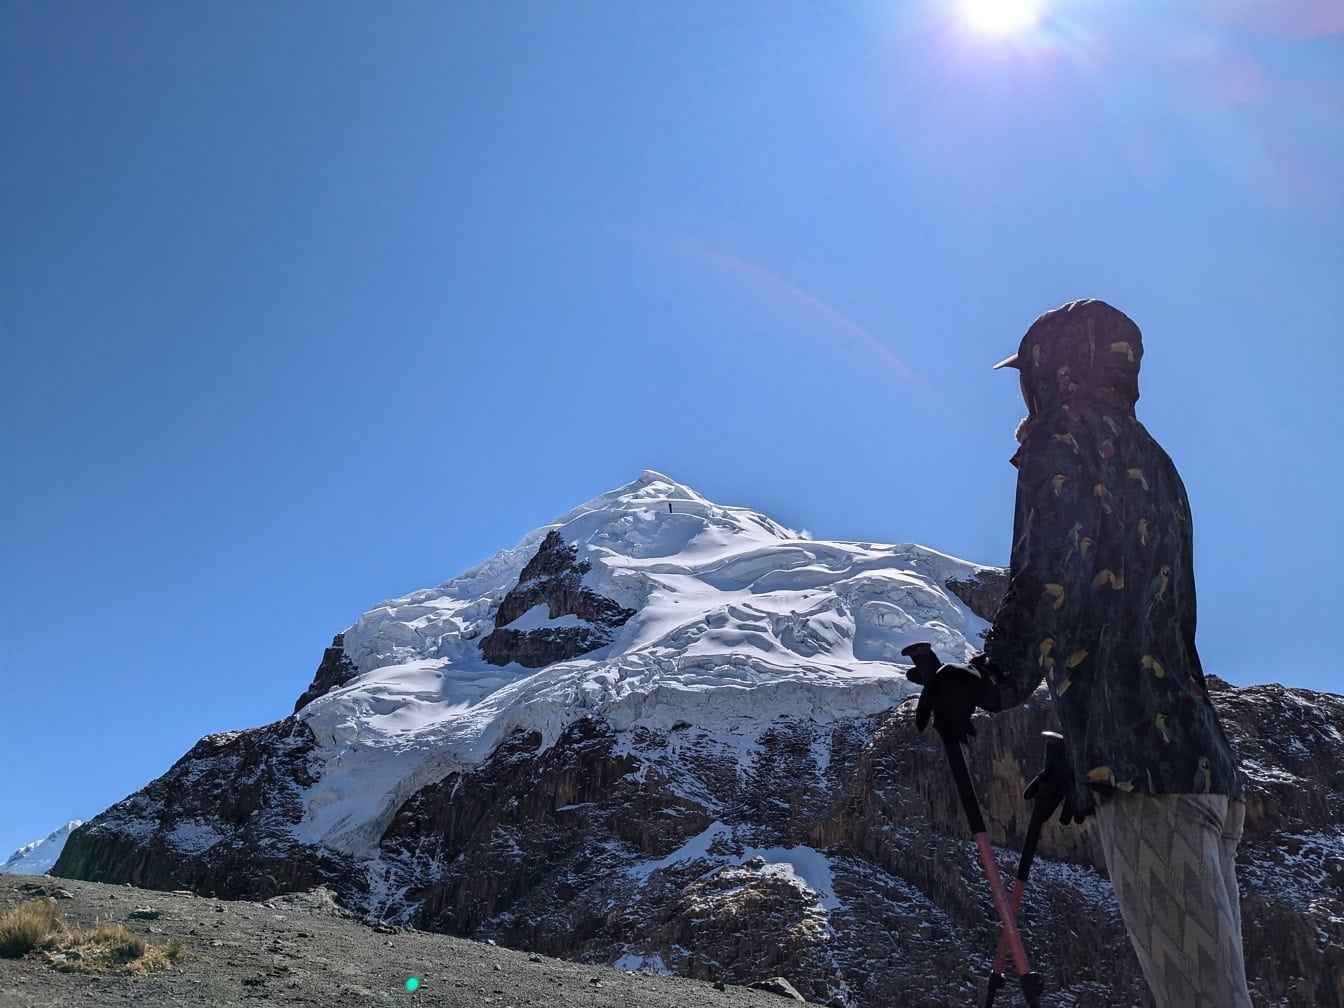 Hiking in front of a snowy mountain with bright sunrays from a blue sky